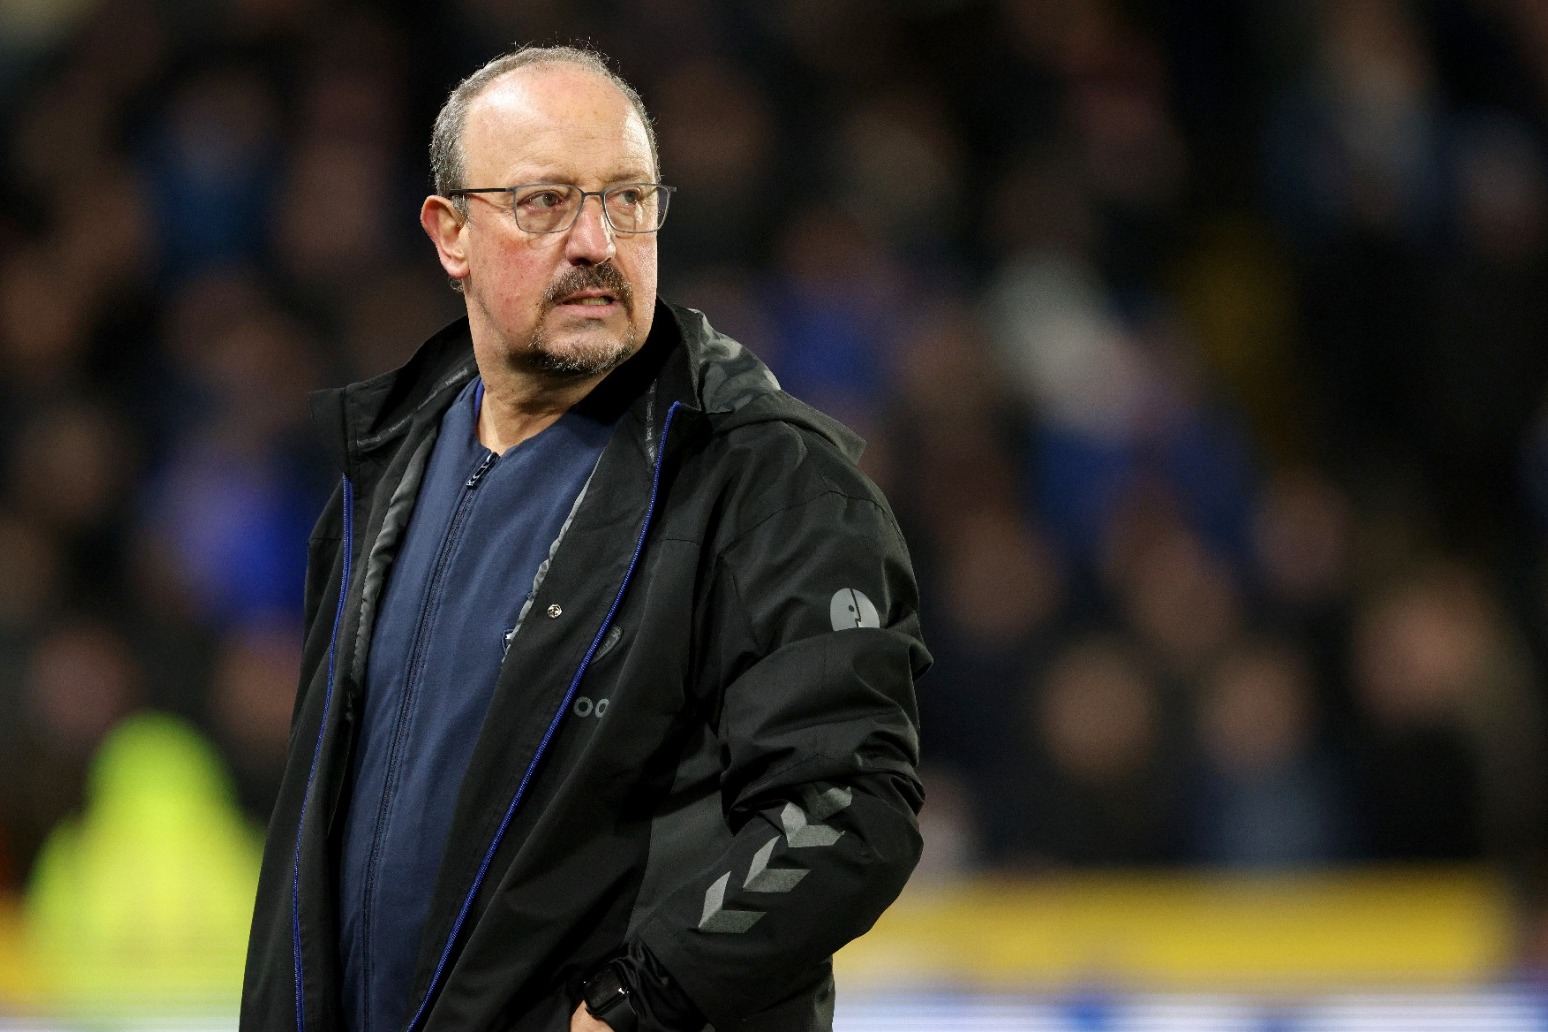 Rafael Benitez sacked as Everton manager after less than seven months at helm